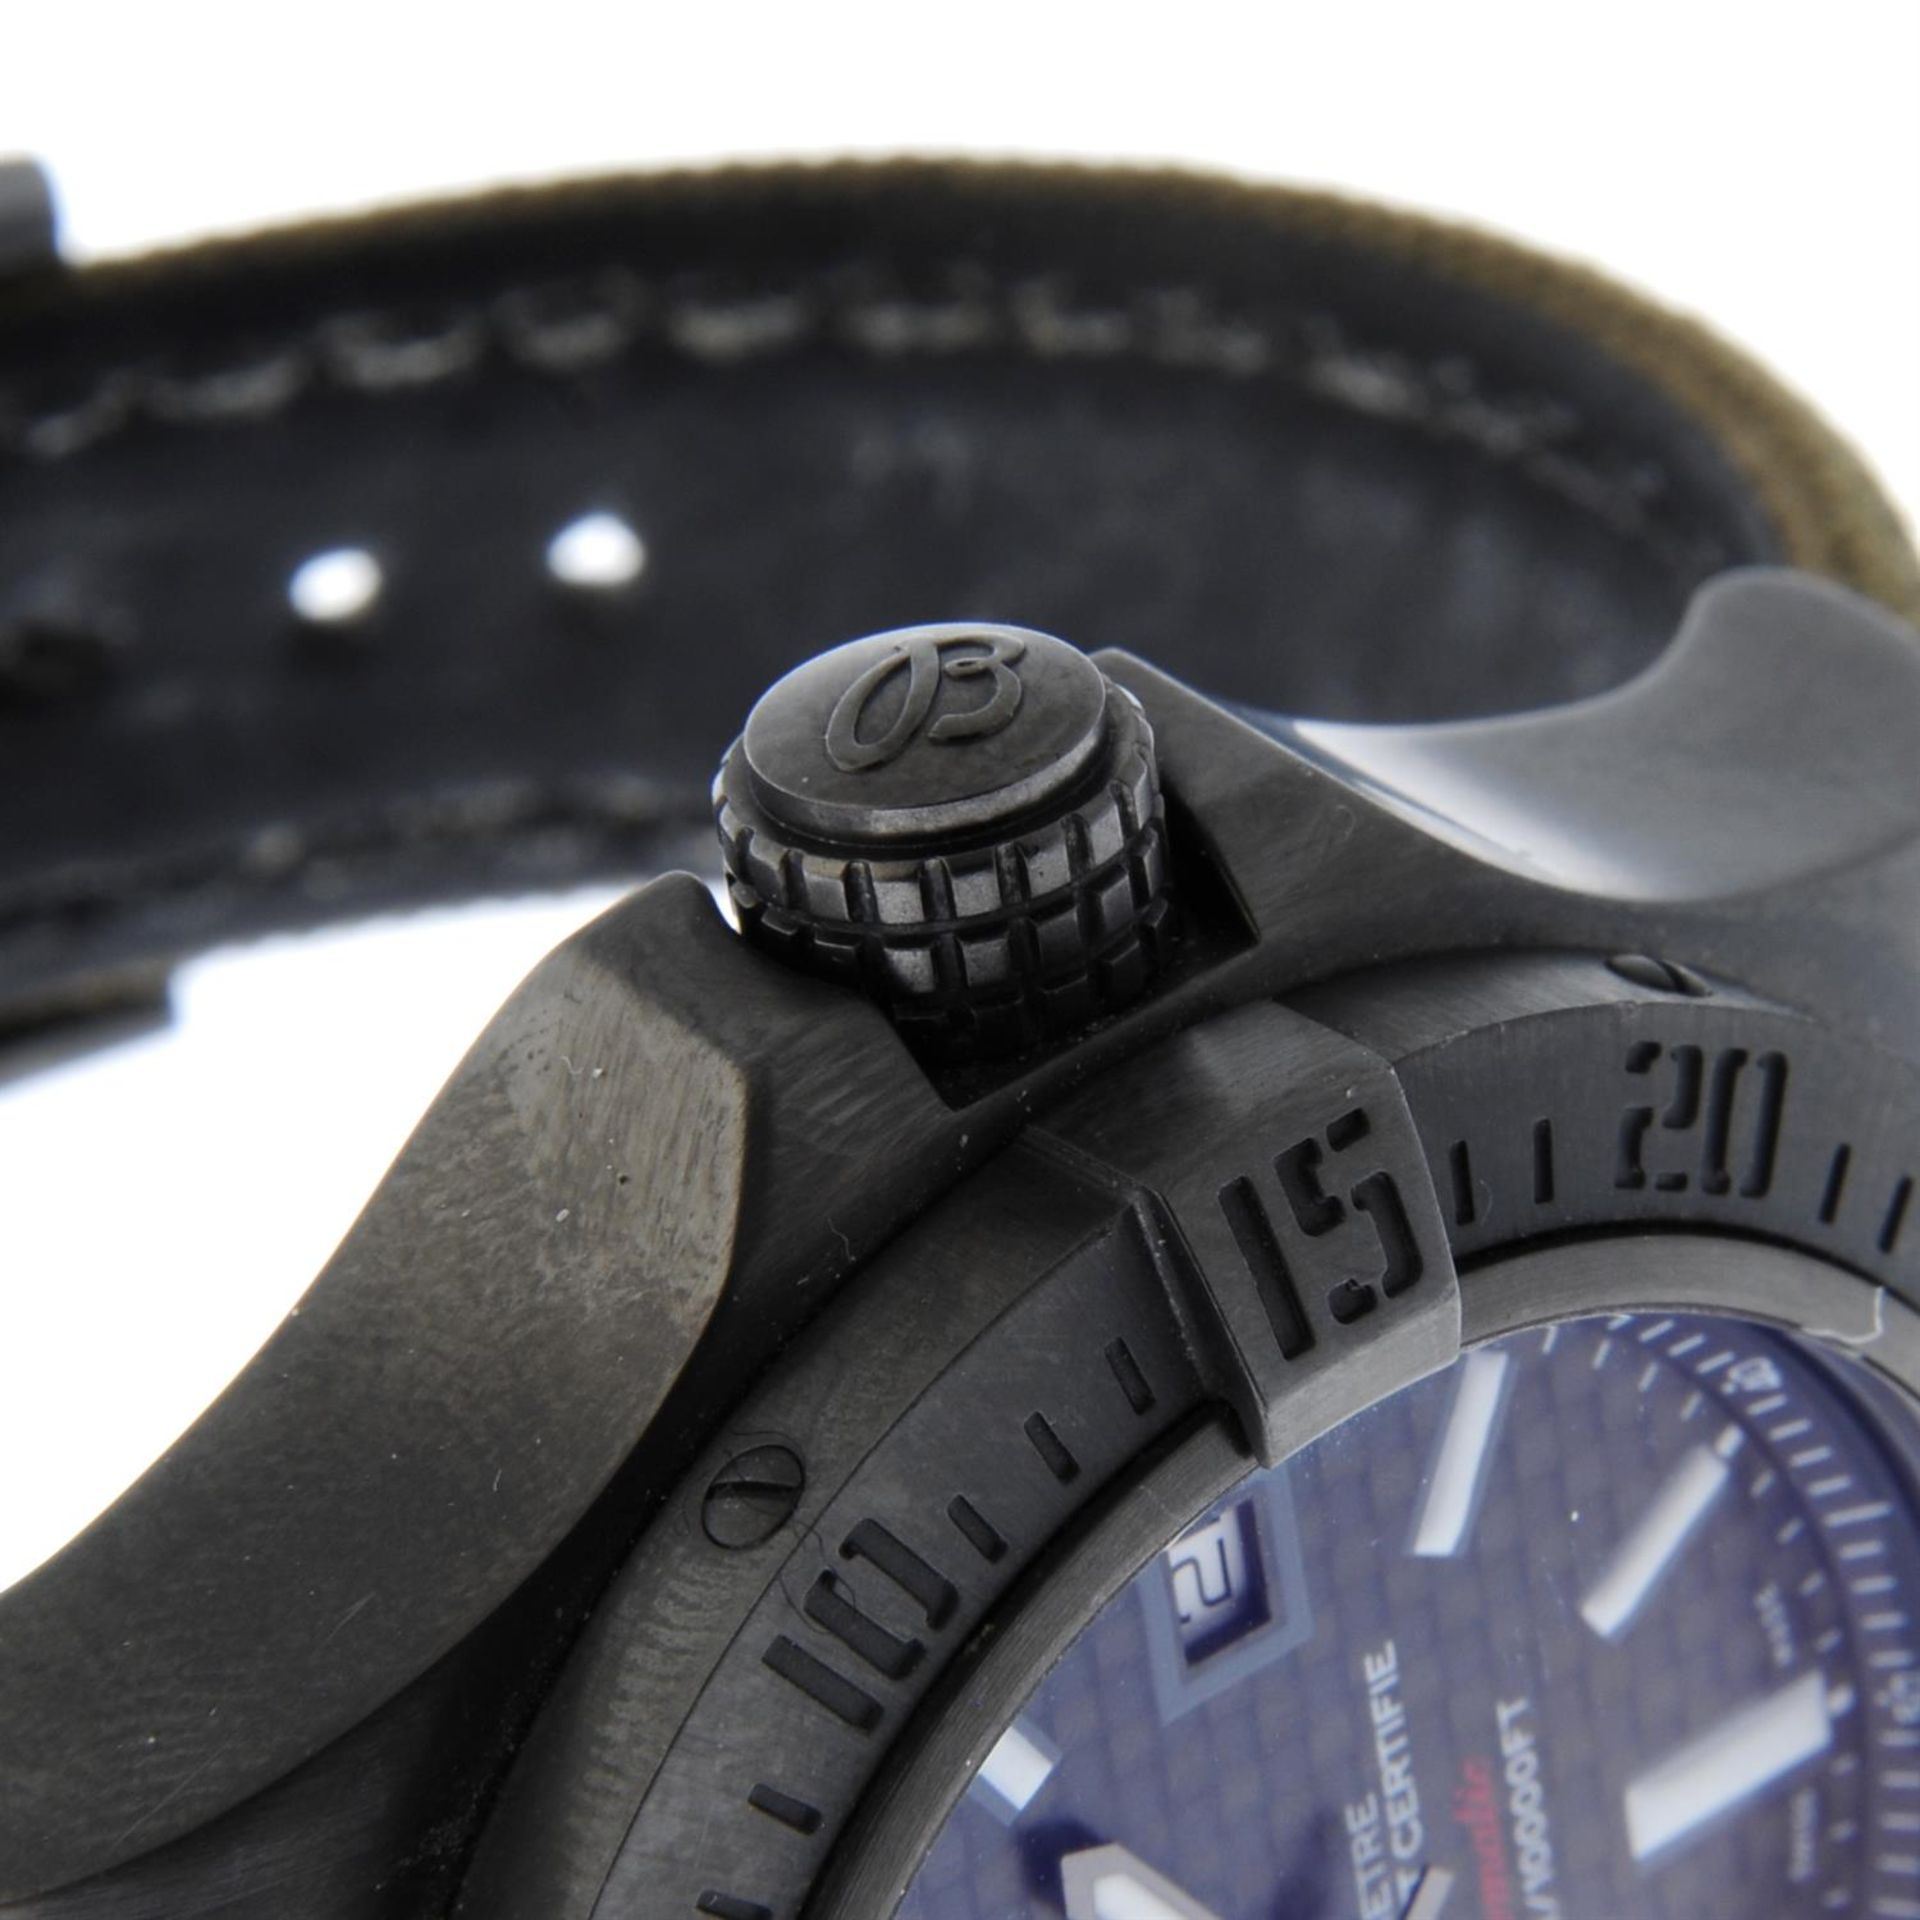 BREITLING - a limited edition PVD coated stainless steel Avenger II Seawolf wristwatch, 44mm. - Image 4 of 6